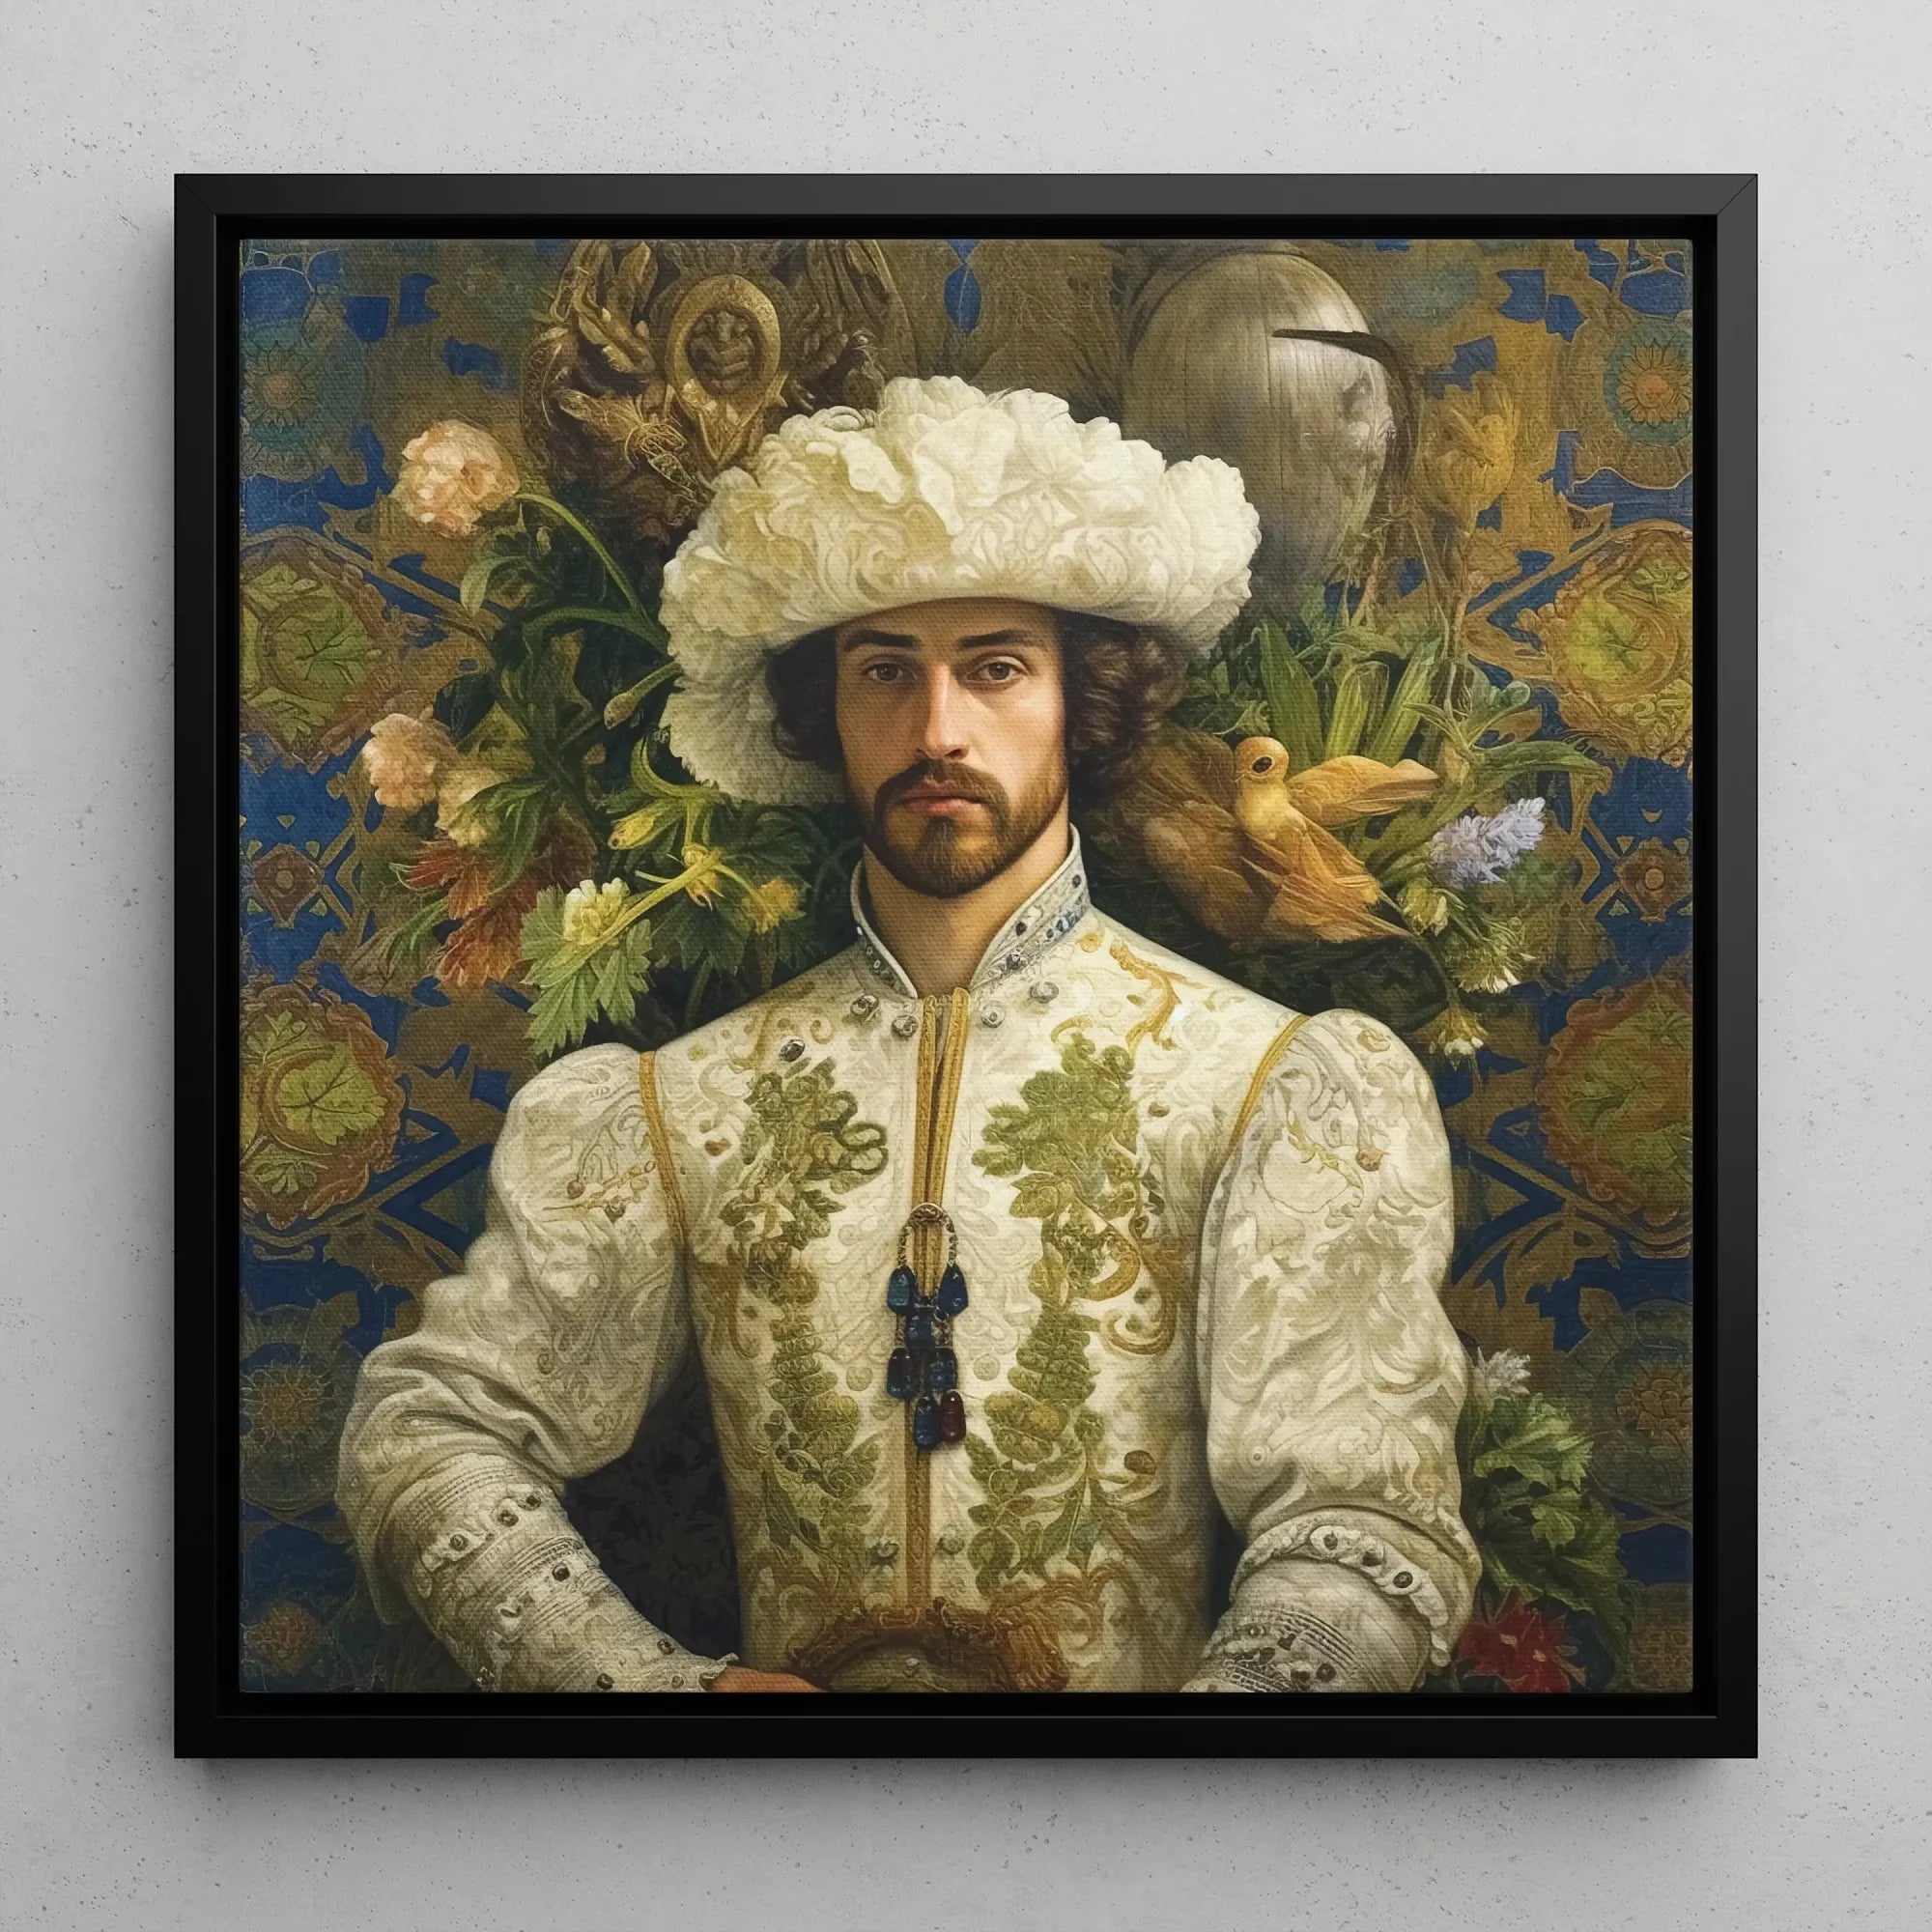 Prince Alfonso - Gay Spanish Royalty Queerart Framed Canvas - 16’x16’ / Black Frame / White Wrap - Posters Prints &